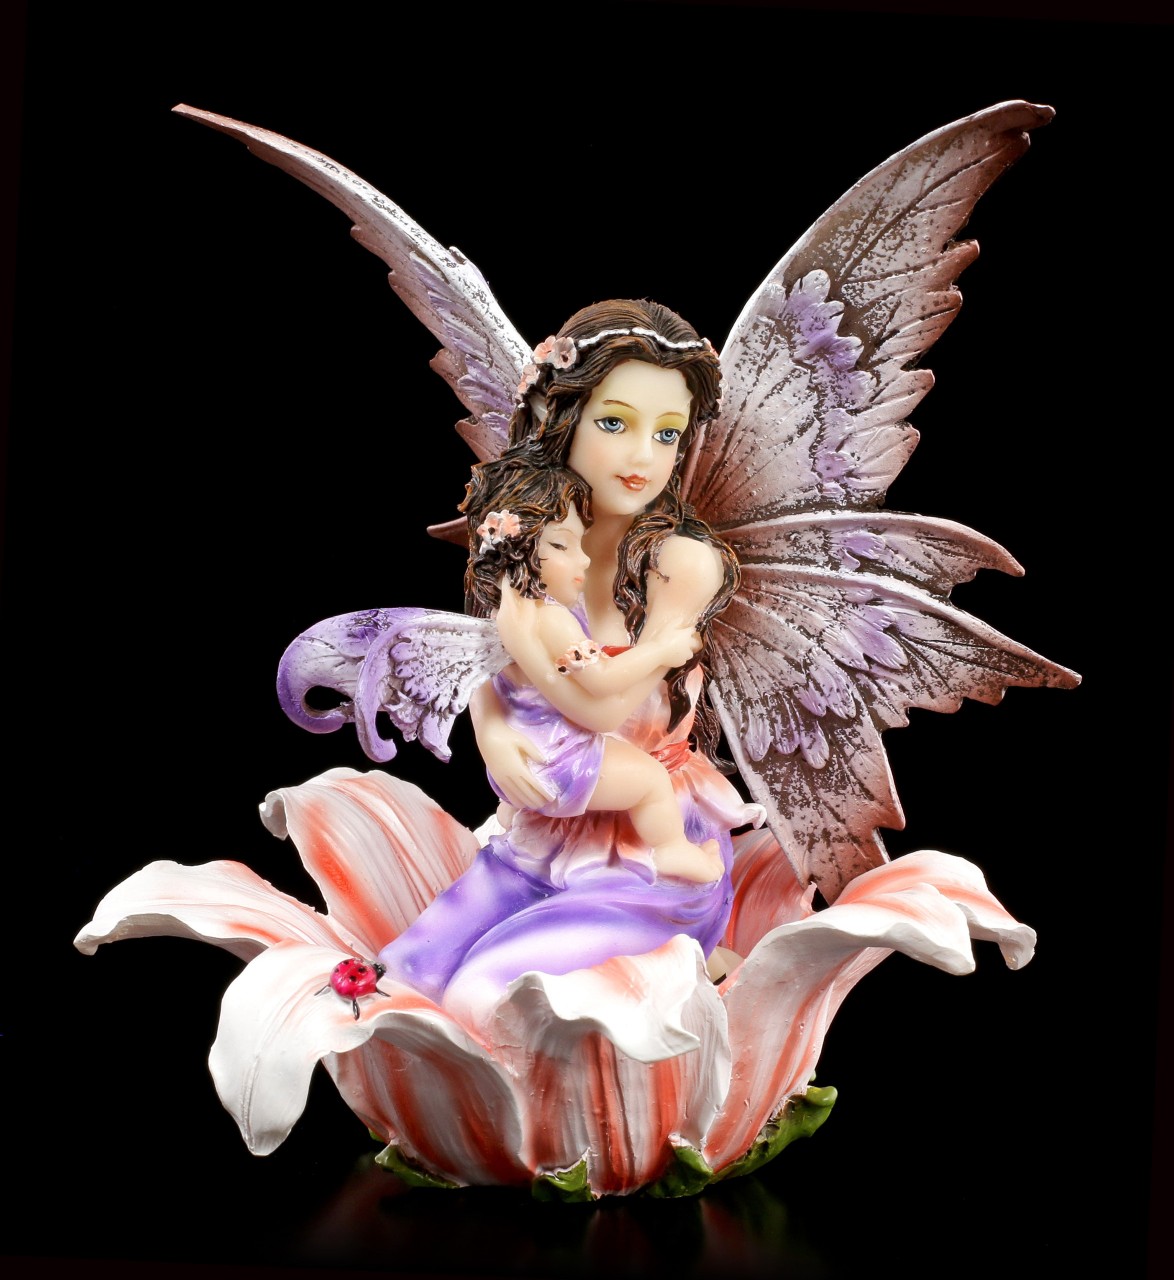 Fairy Figurine - Lisanya with Child in Arm